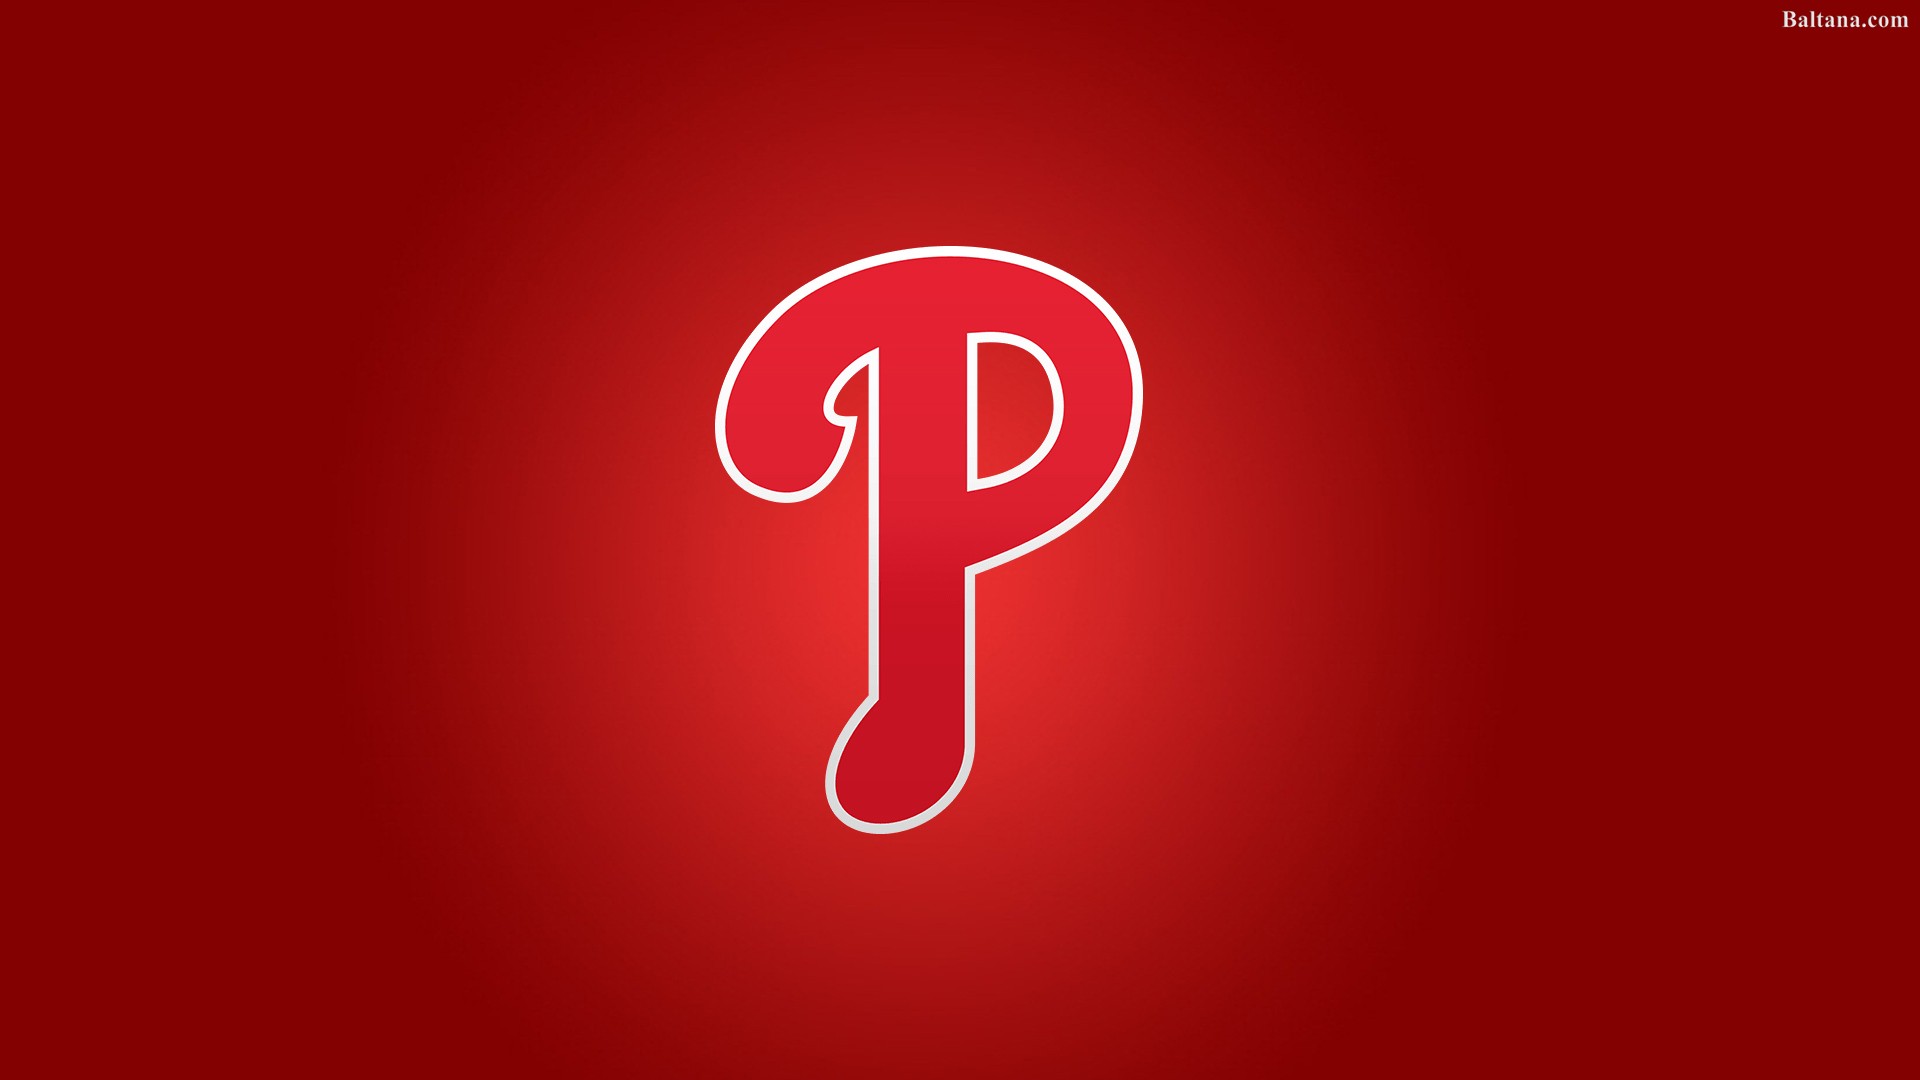 Phillies Wallpapers